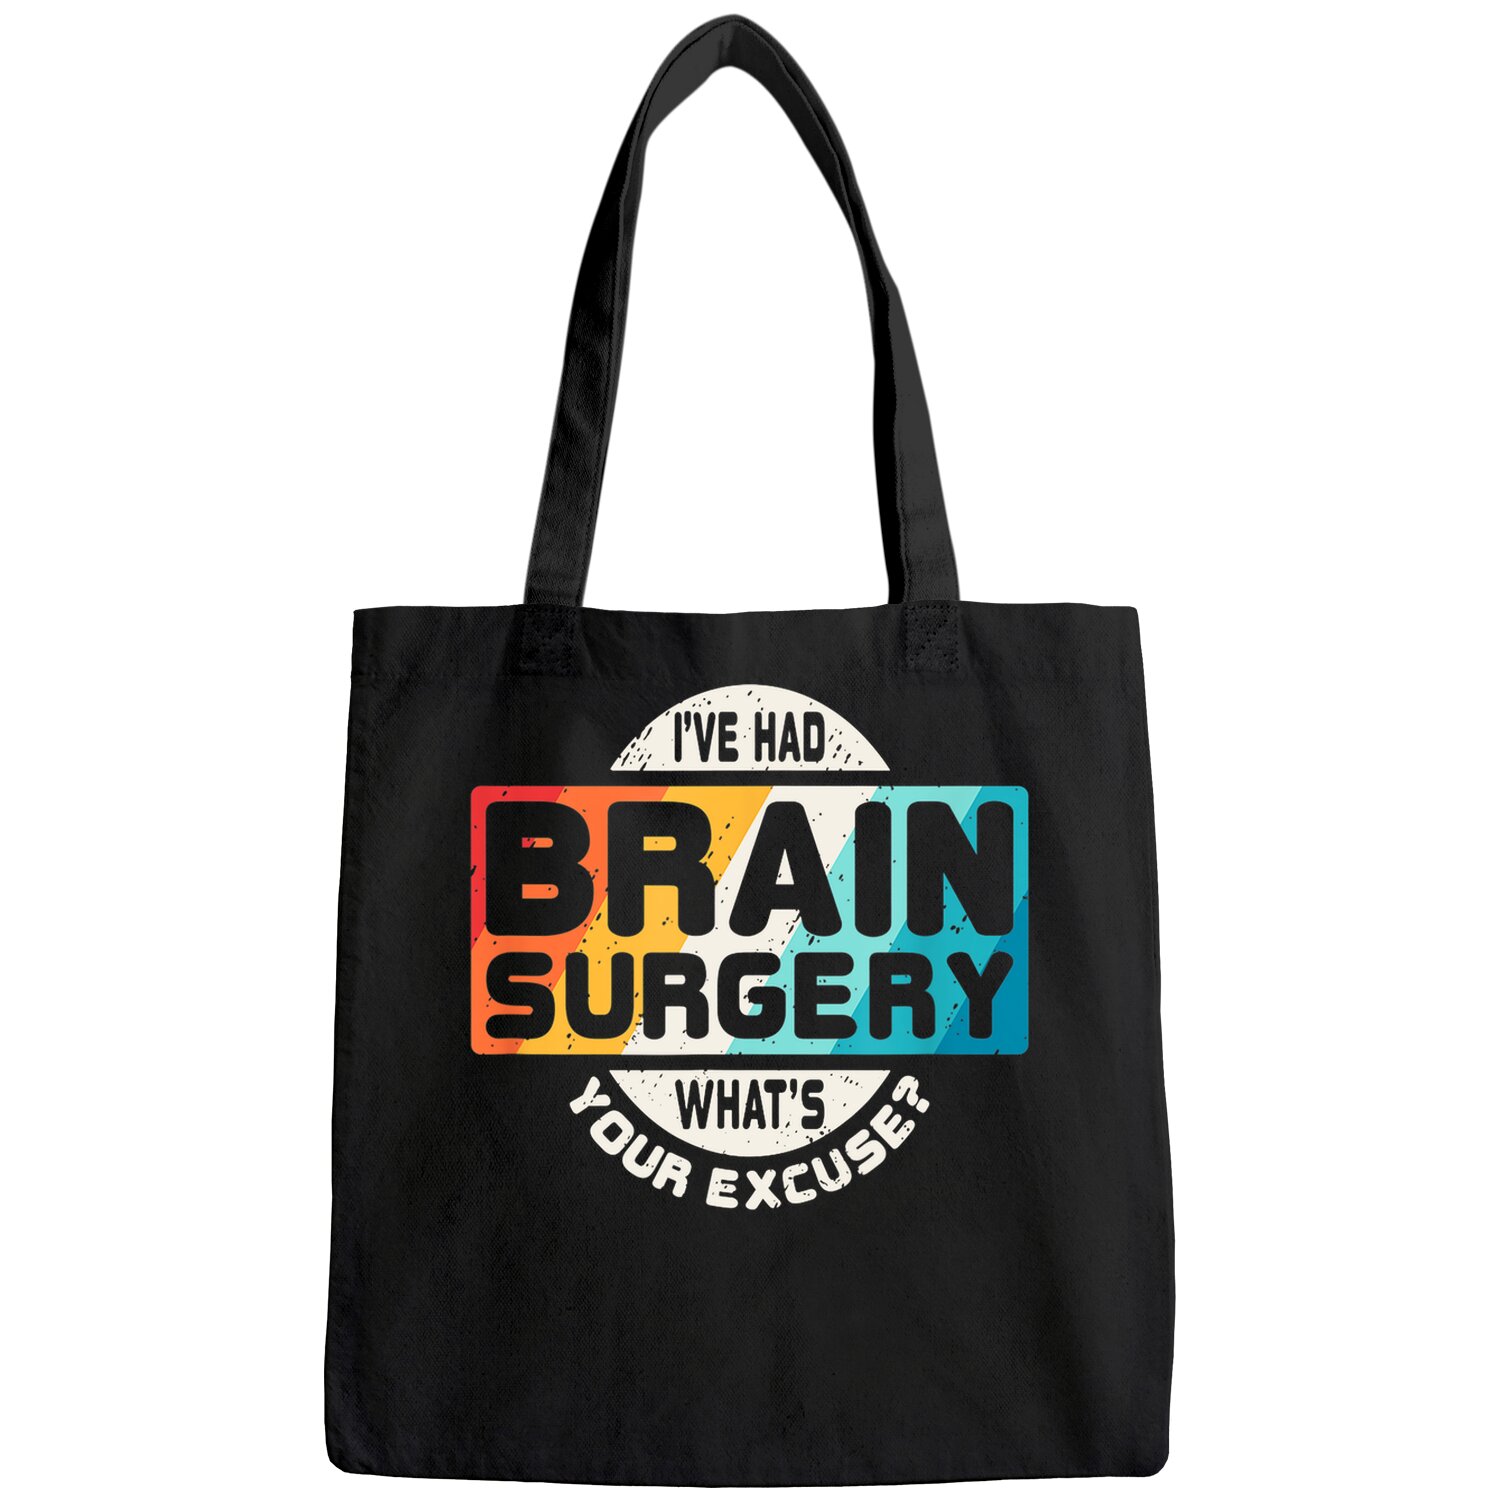 Brain Surgery Tote Bag Survivor Post Cancer Tumor Recovery Gift